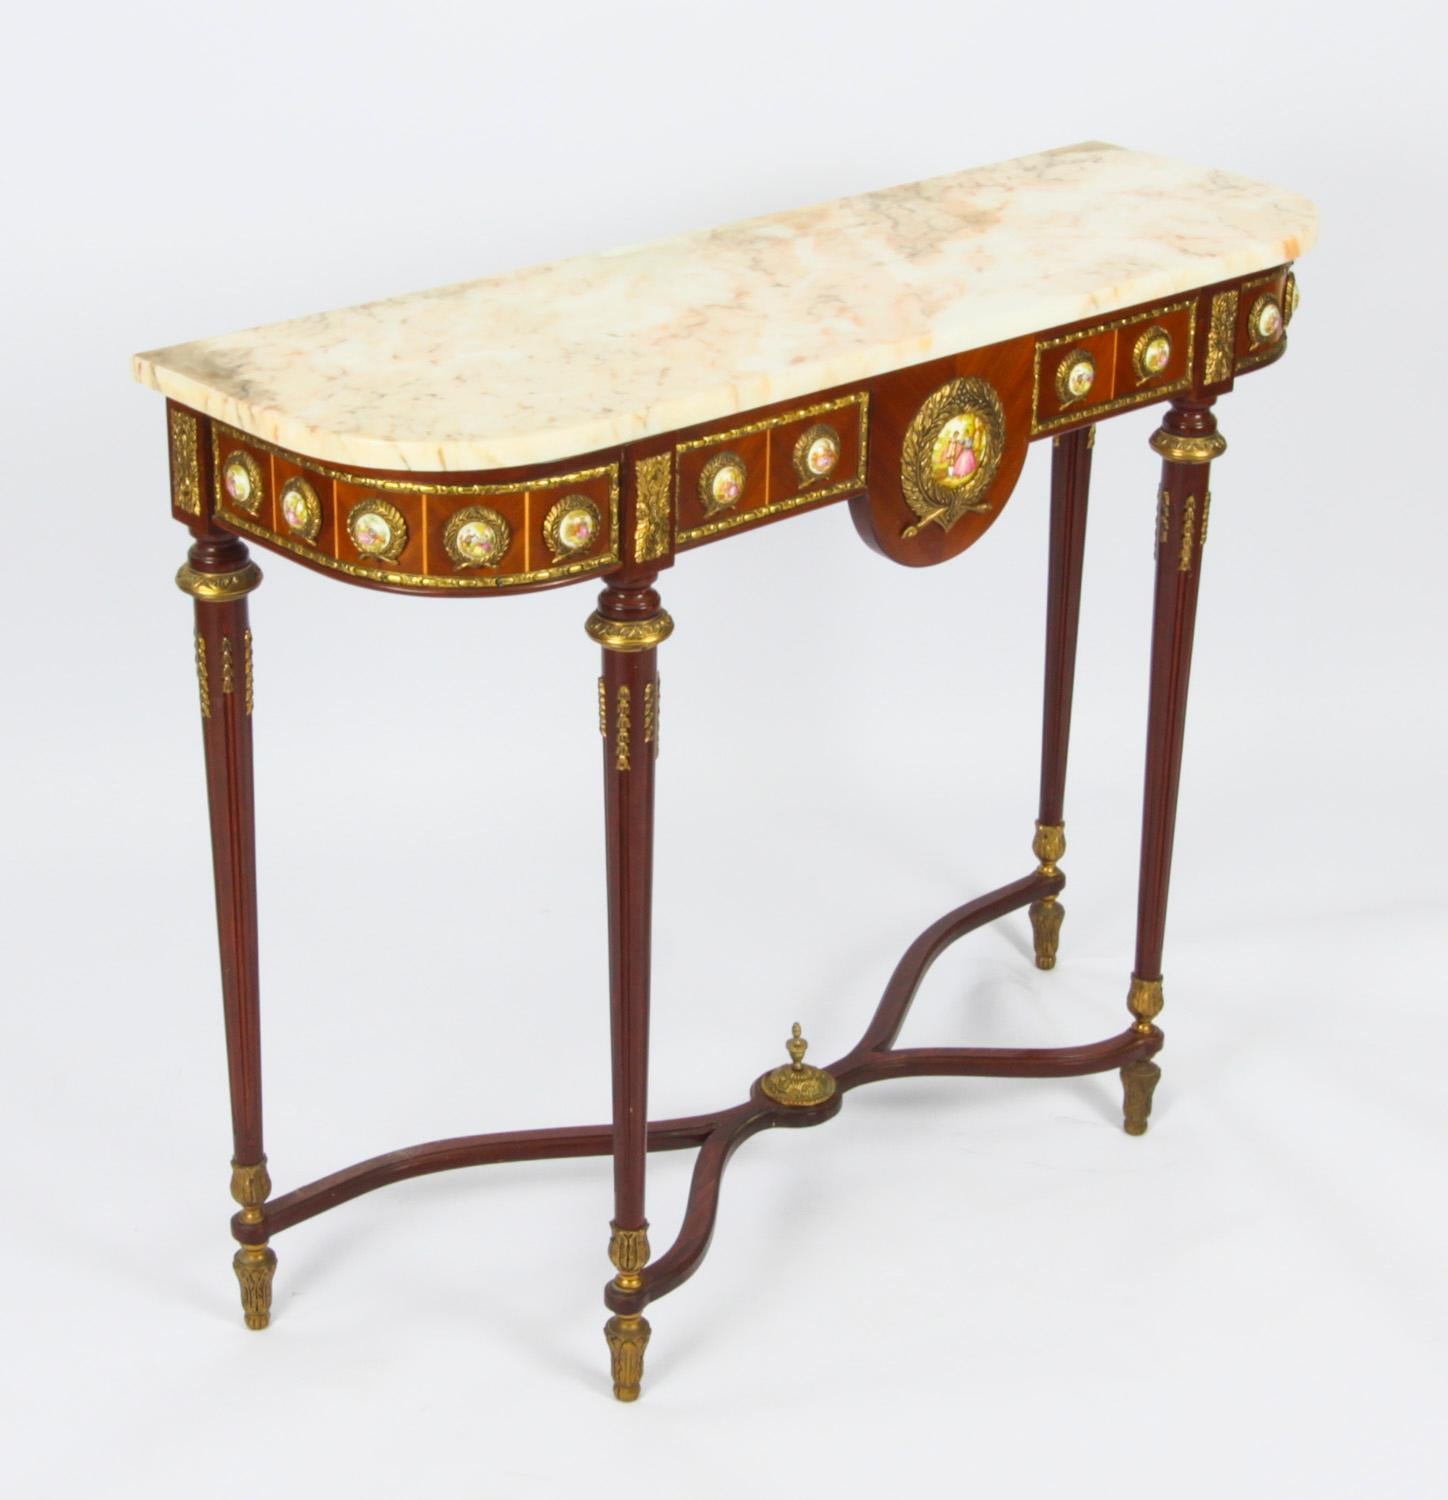 This is an elegant French Louis Revival console table dating from the mid 20th Century.

This magnificent piece is crafted from wood with stunnning ormolu mounts and features fourteen small Sevres style porcelain plaques depicting courting couples